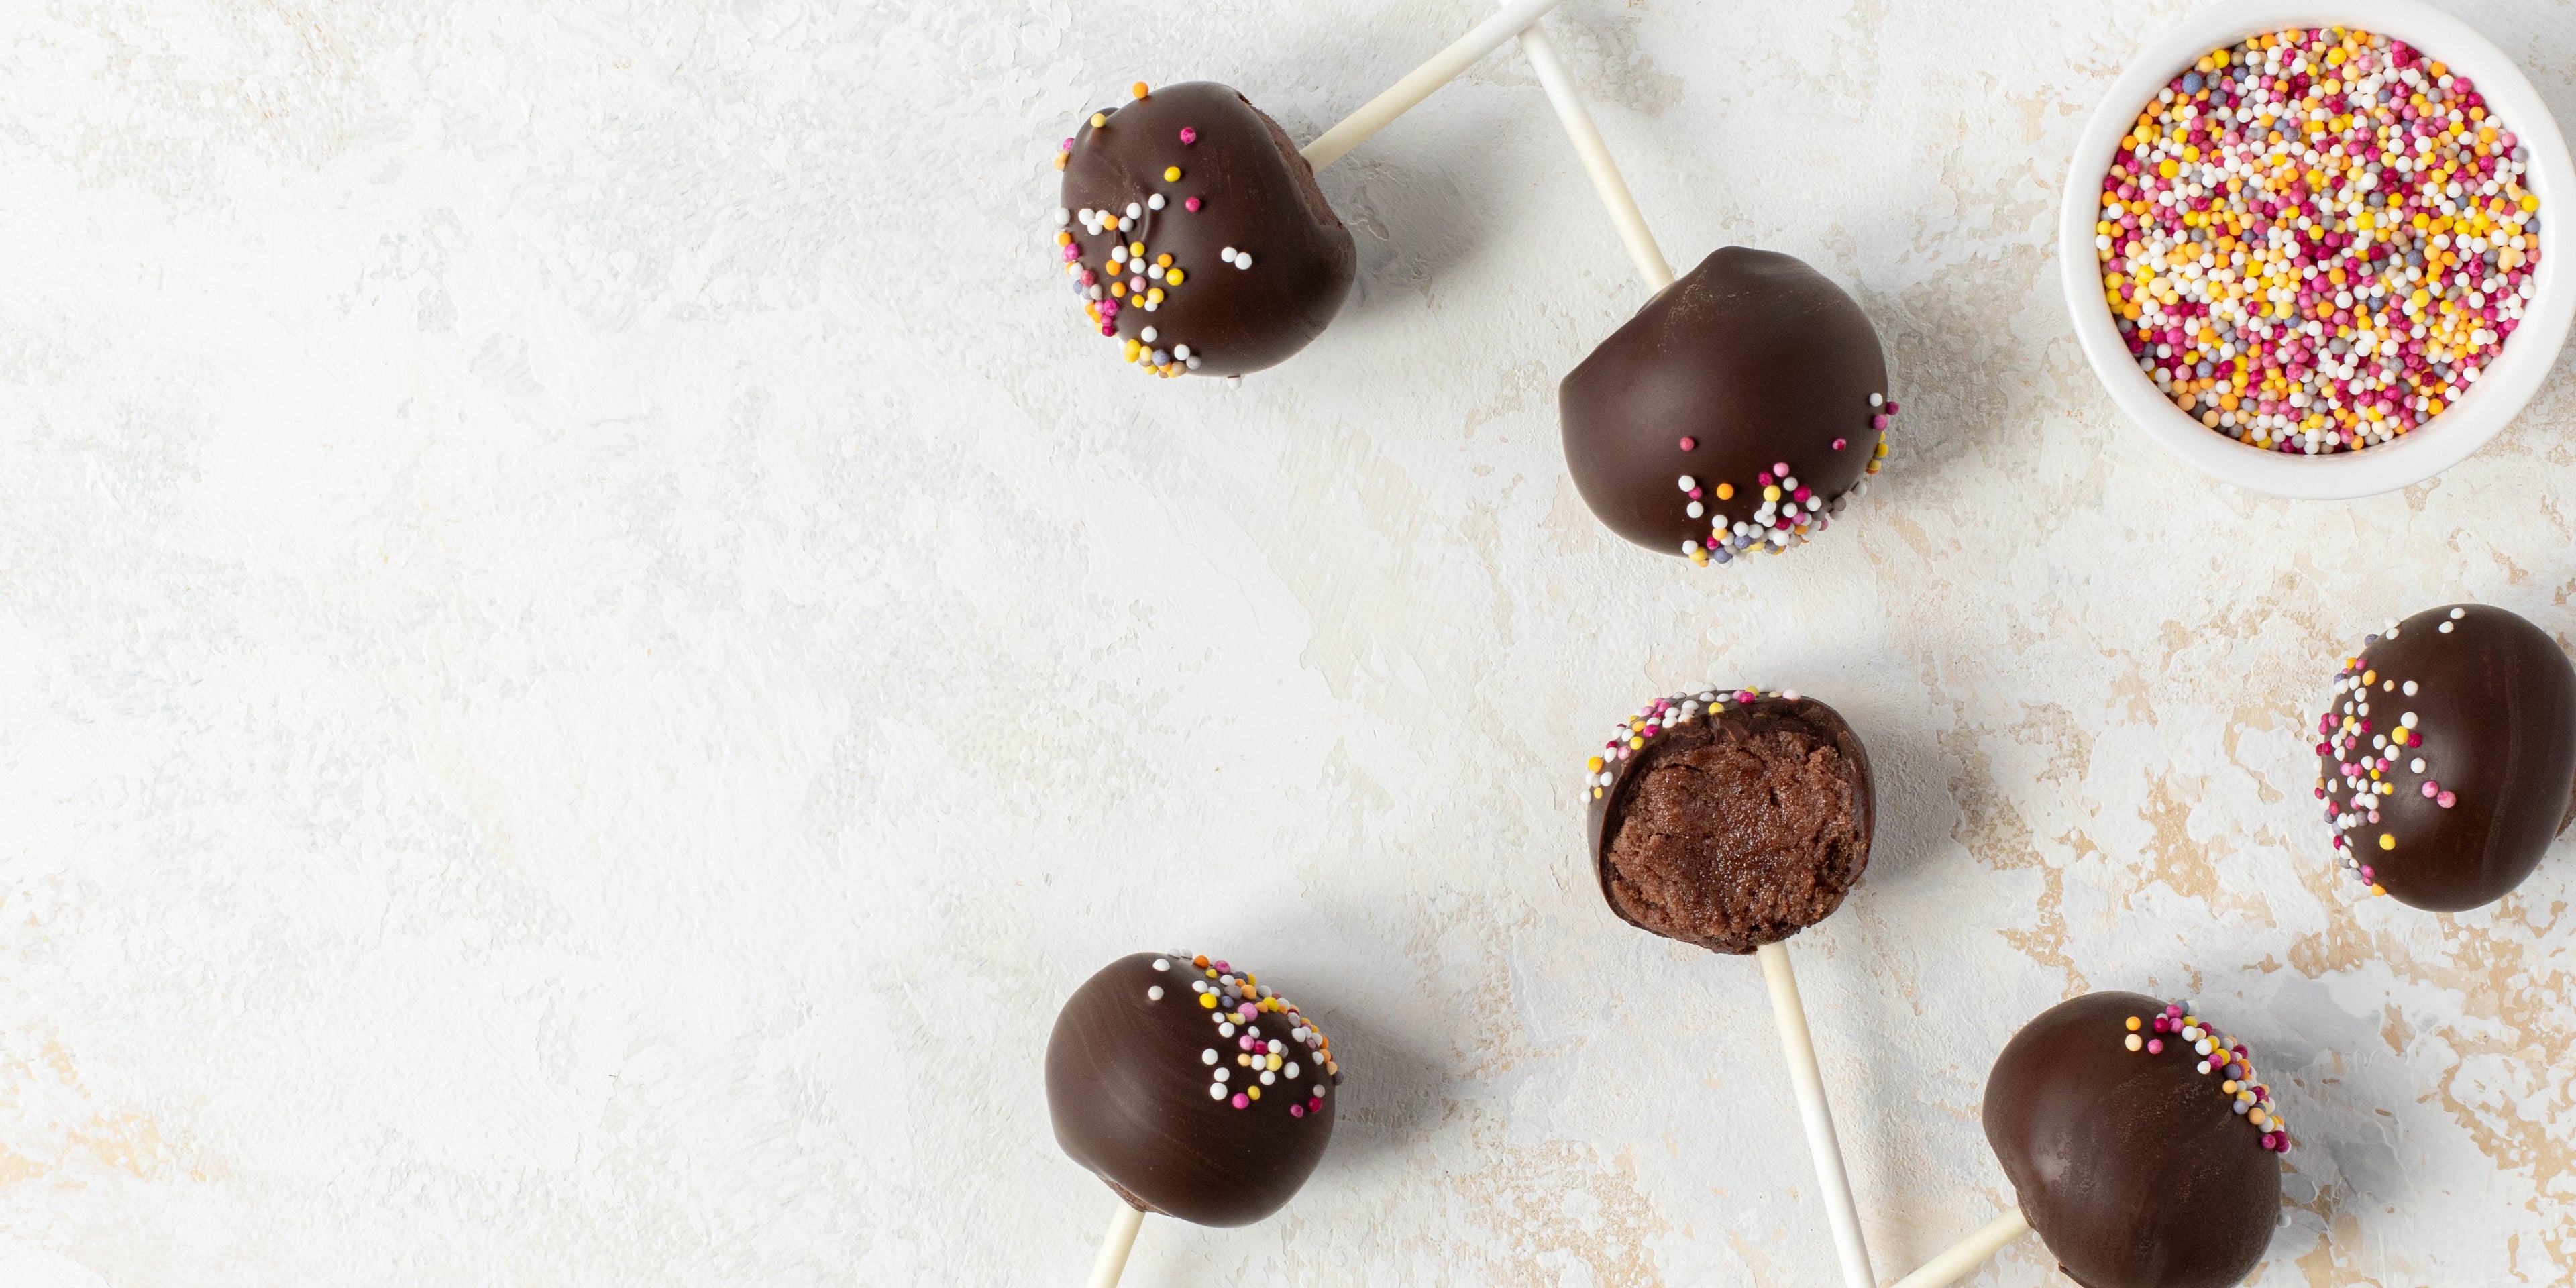 Top view of Chocolate Cake Pops scattered with a bite taken out of a cake pop, showing the centre, next to a bowl of sprinkles.